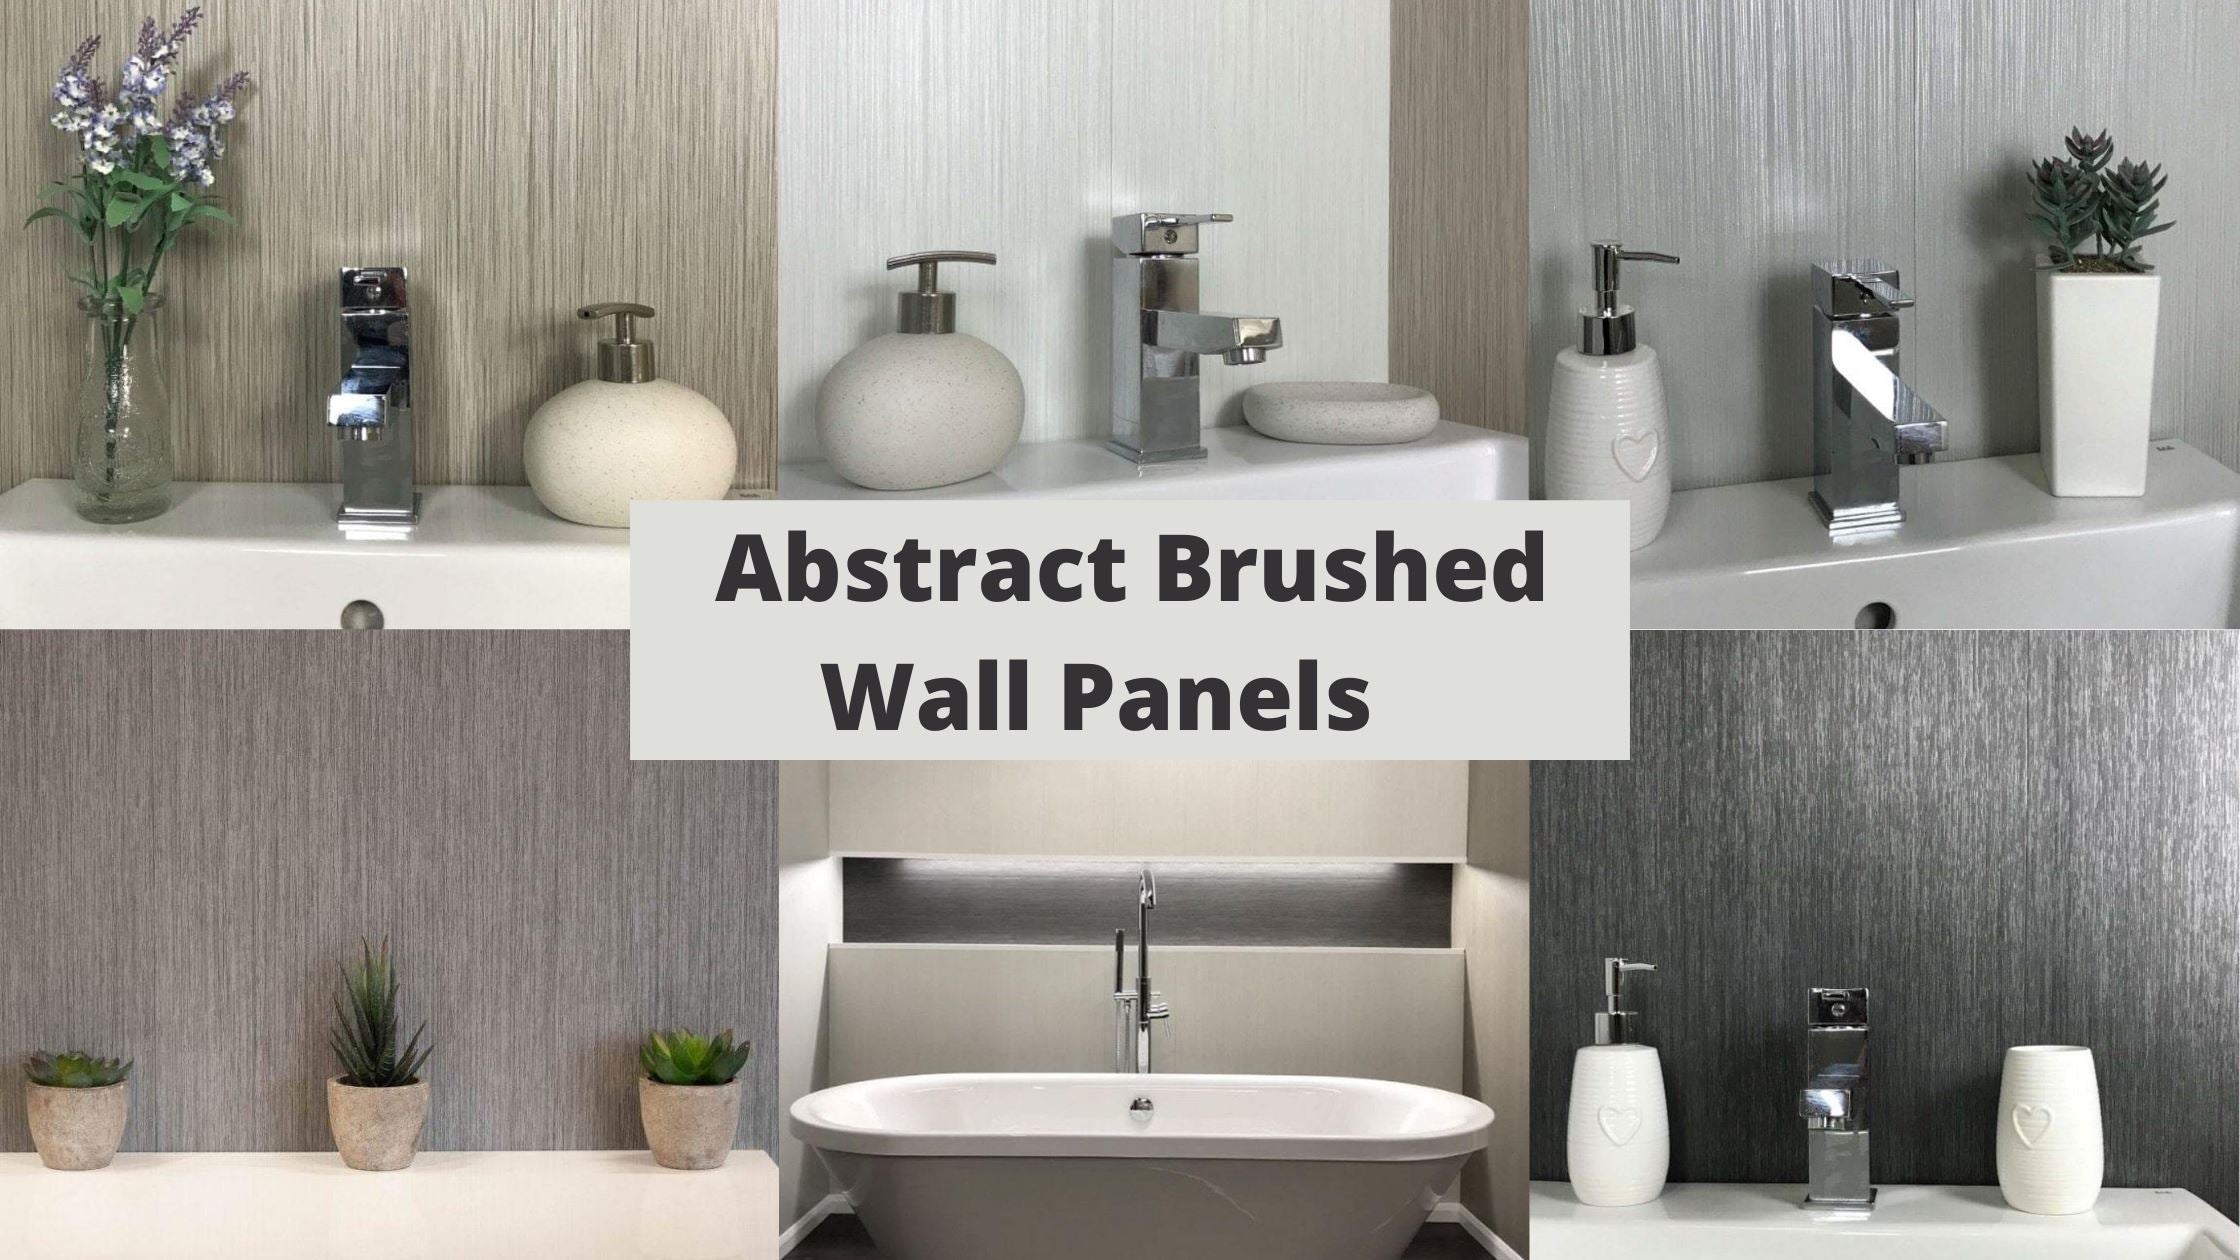 Mix and Match Abstract Wall Panels